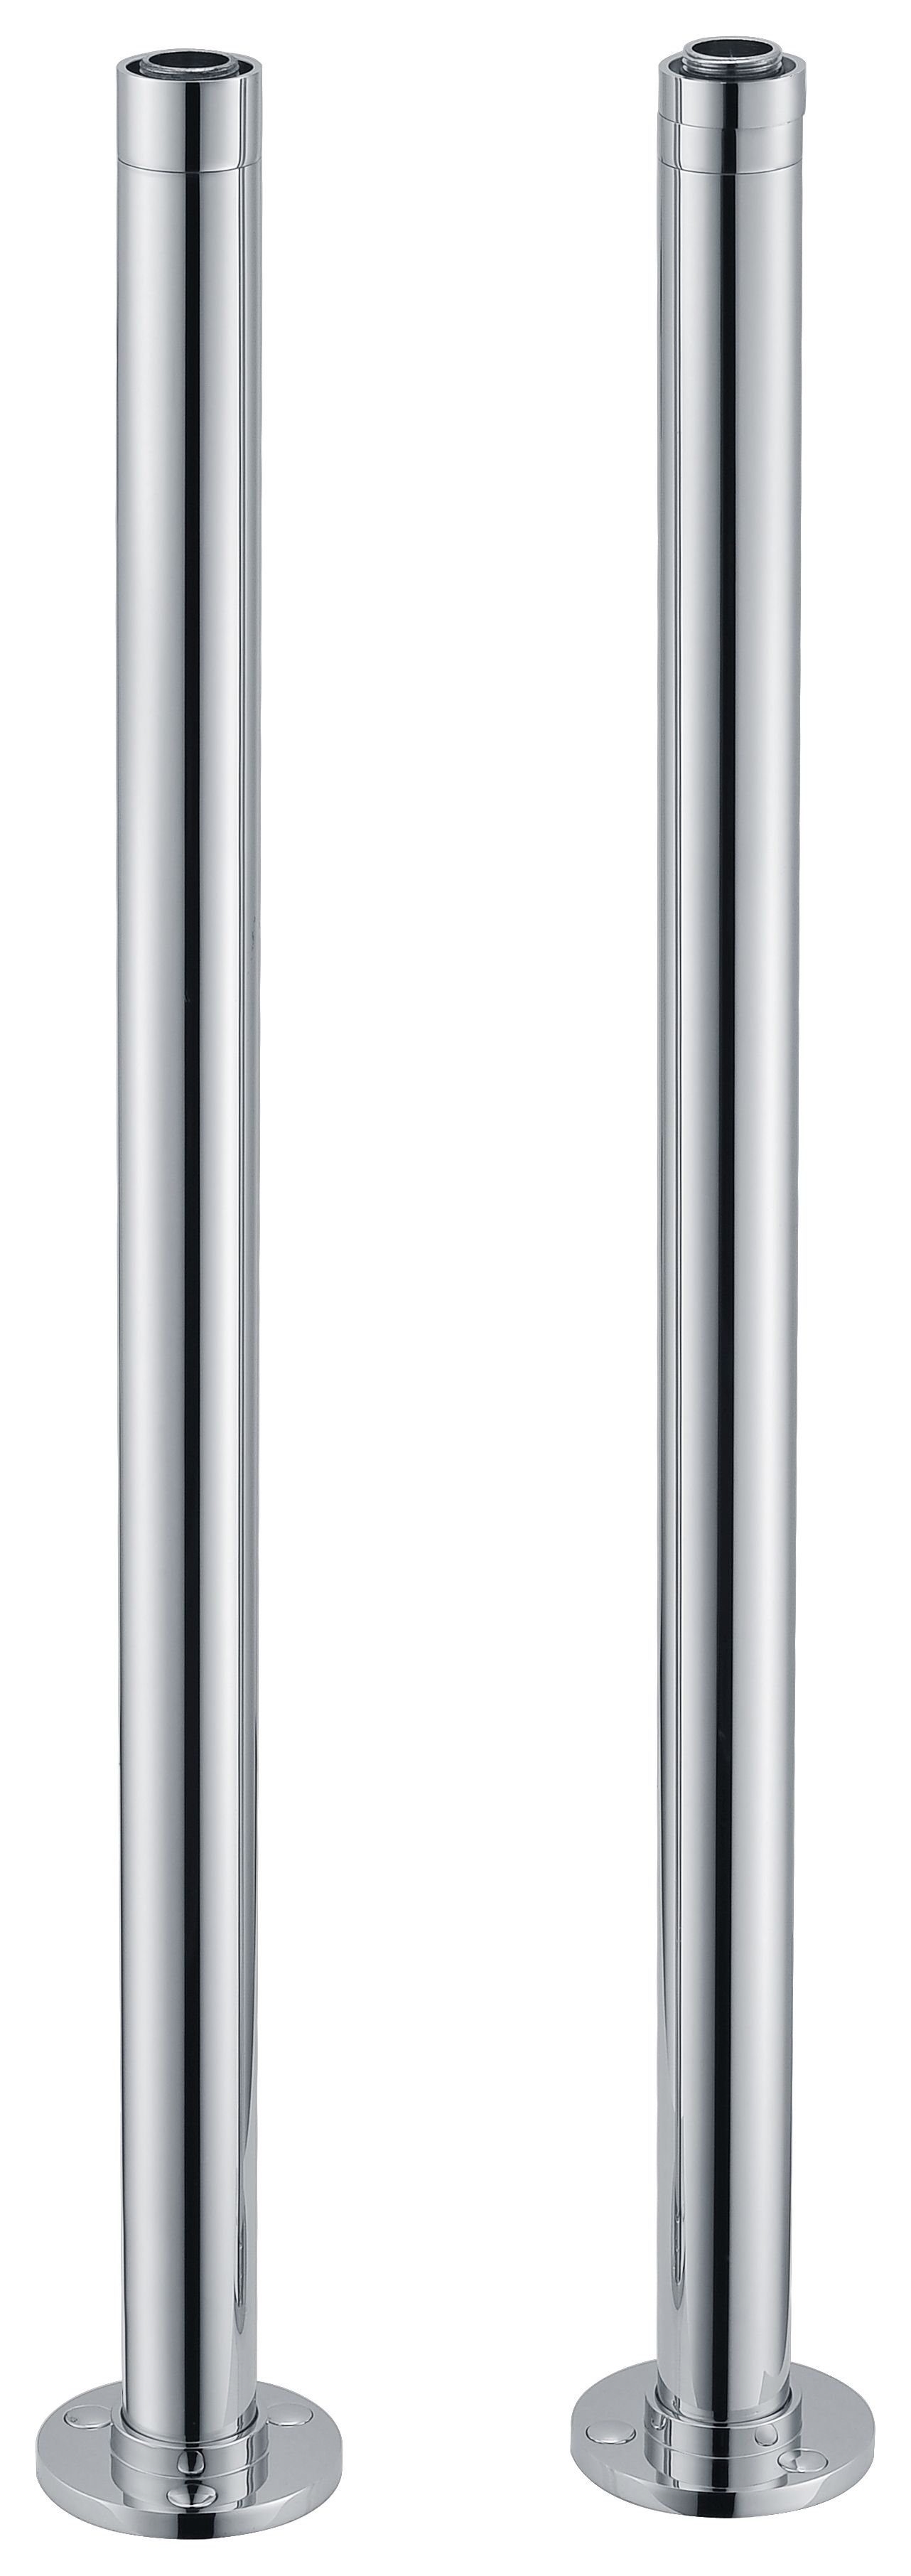 Image of Wickes Decorative Telescopic Standpipes For Freestanding Baths - Chrome